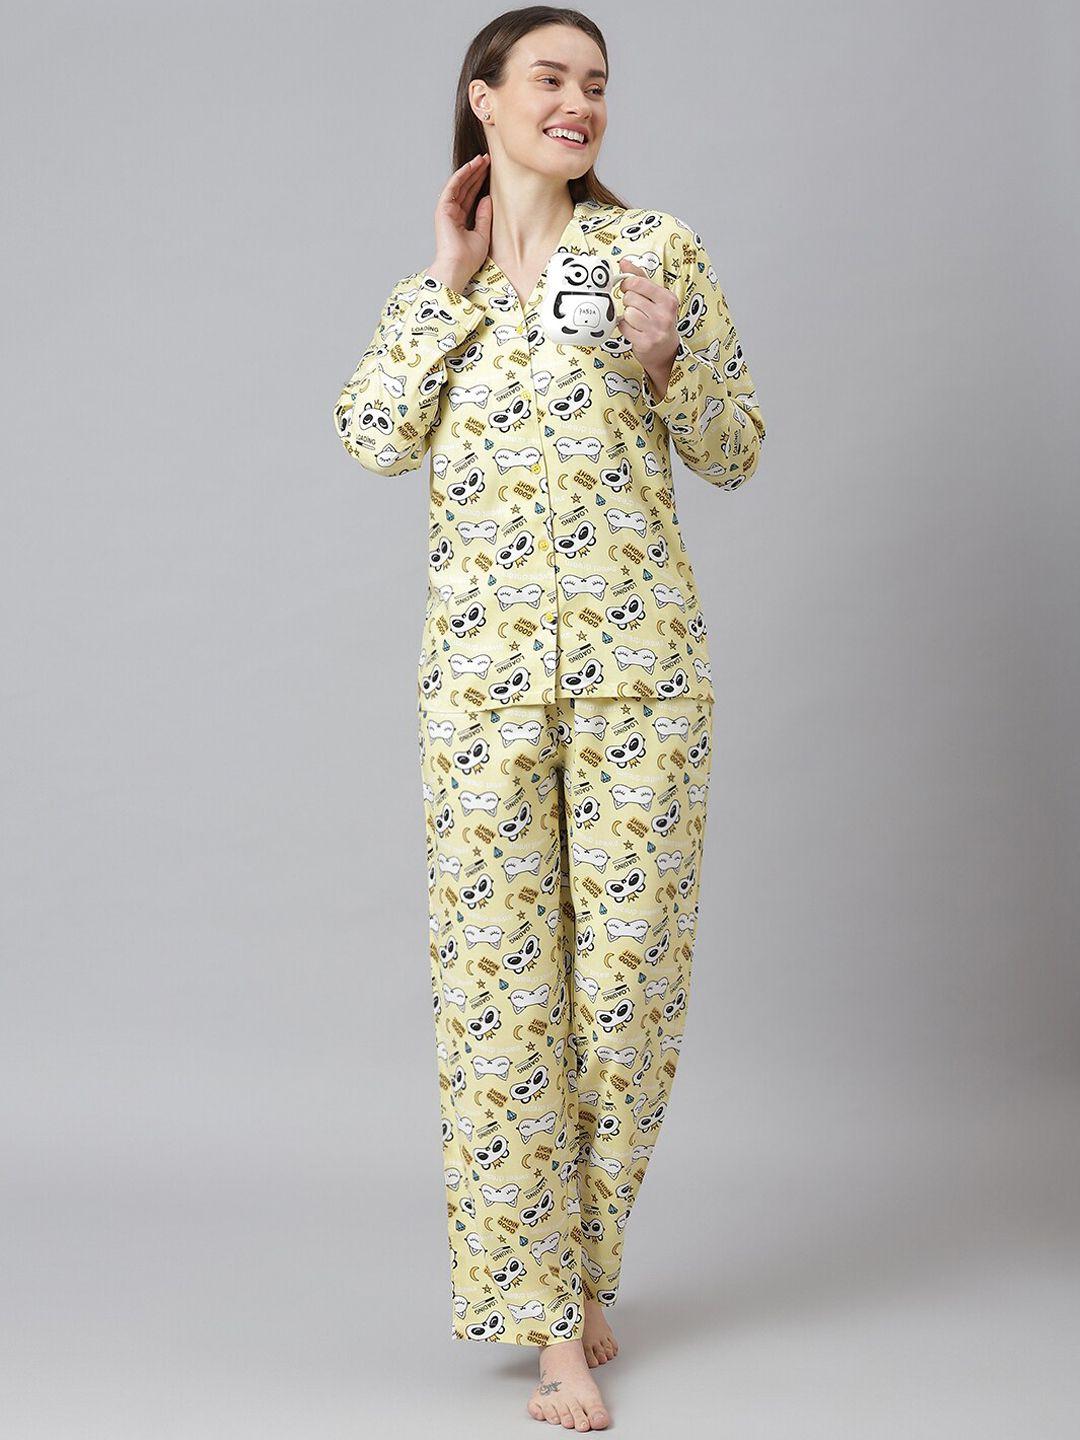 cation-women-yellow-&-black-humour-and-comic-printed-night-suit